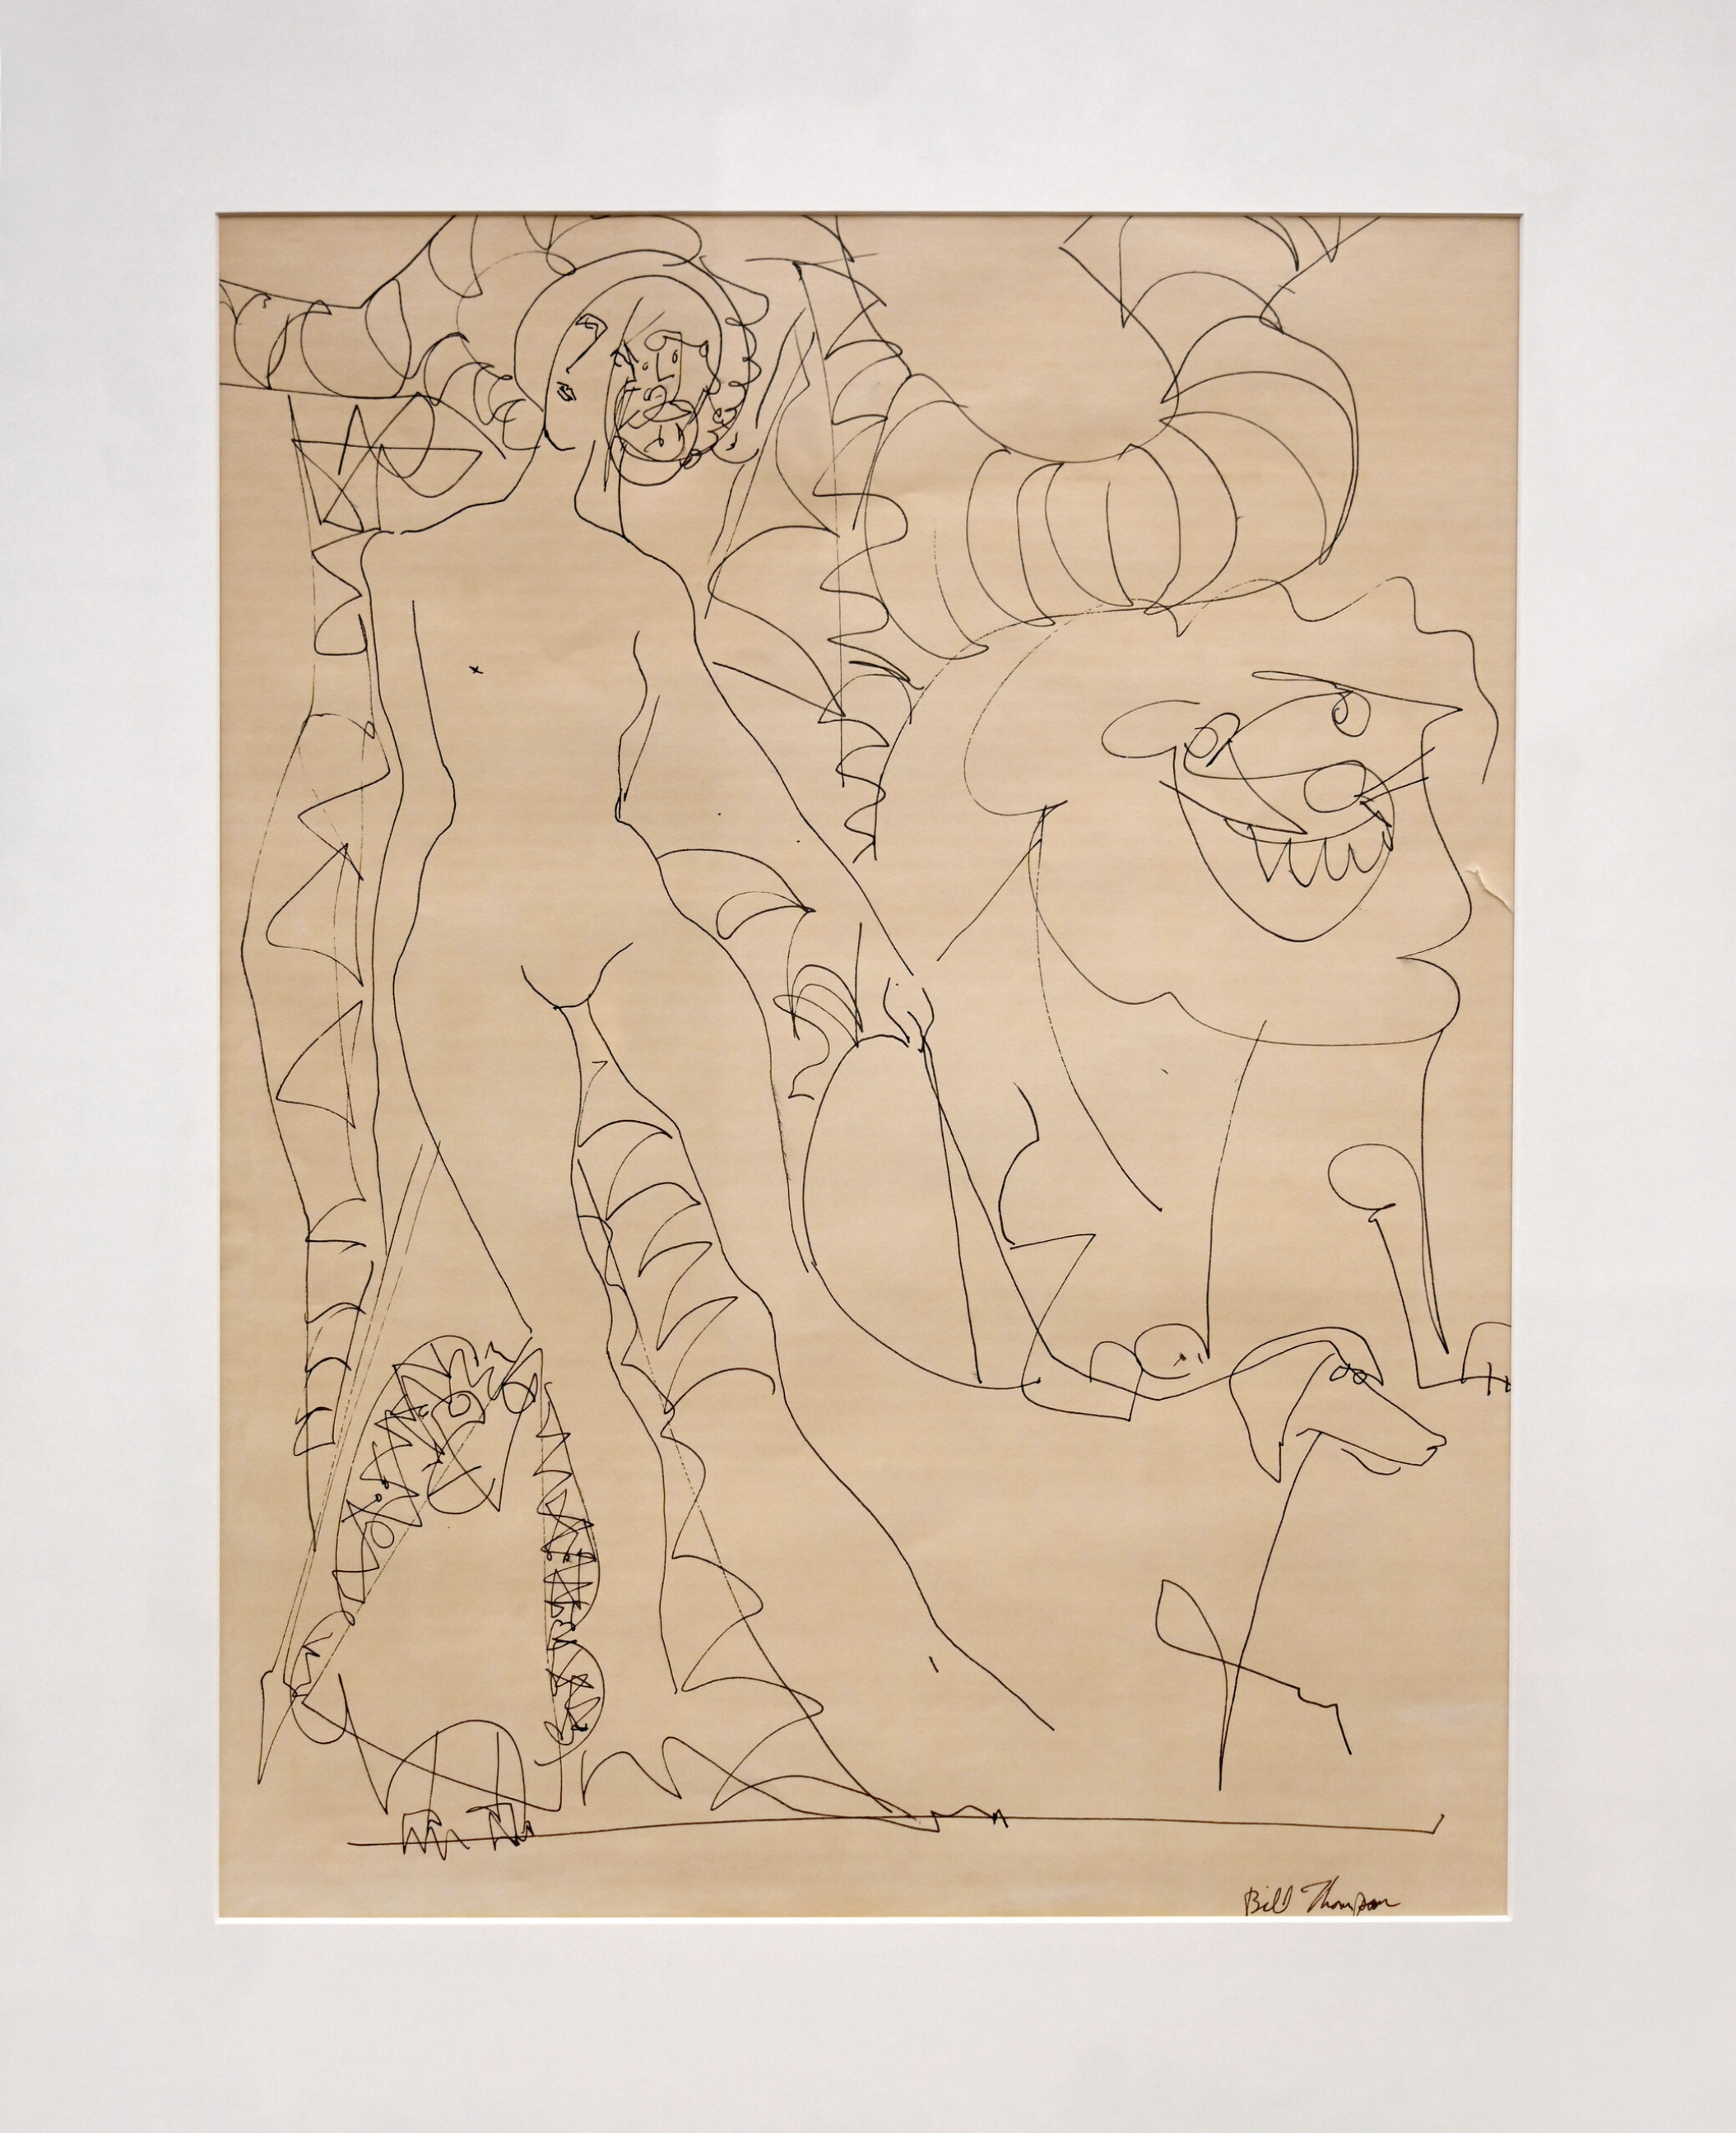  “Eve and Animals in Garden,” 1976-79, ink on paper 